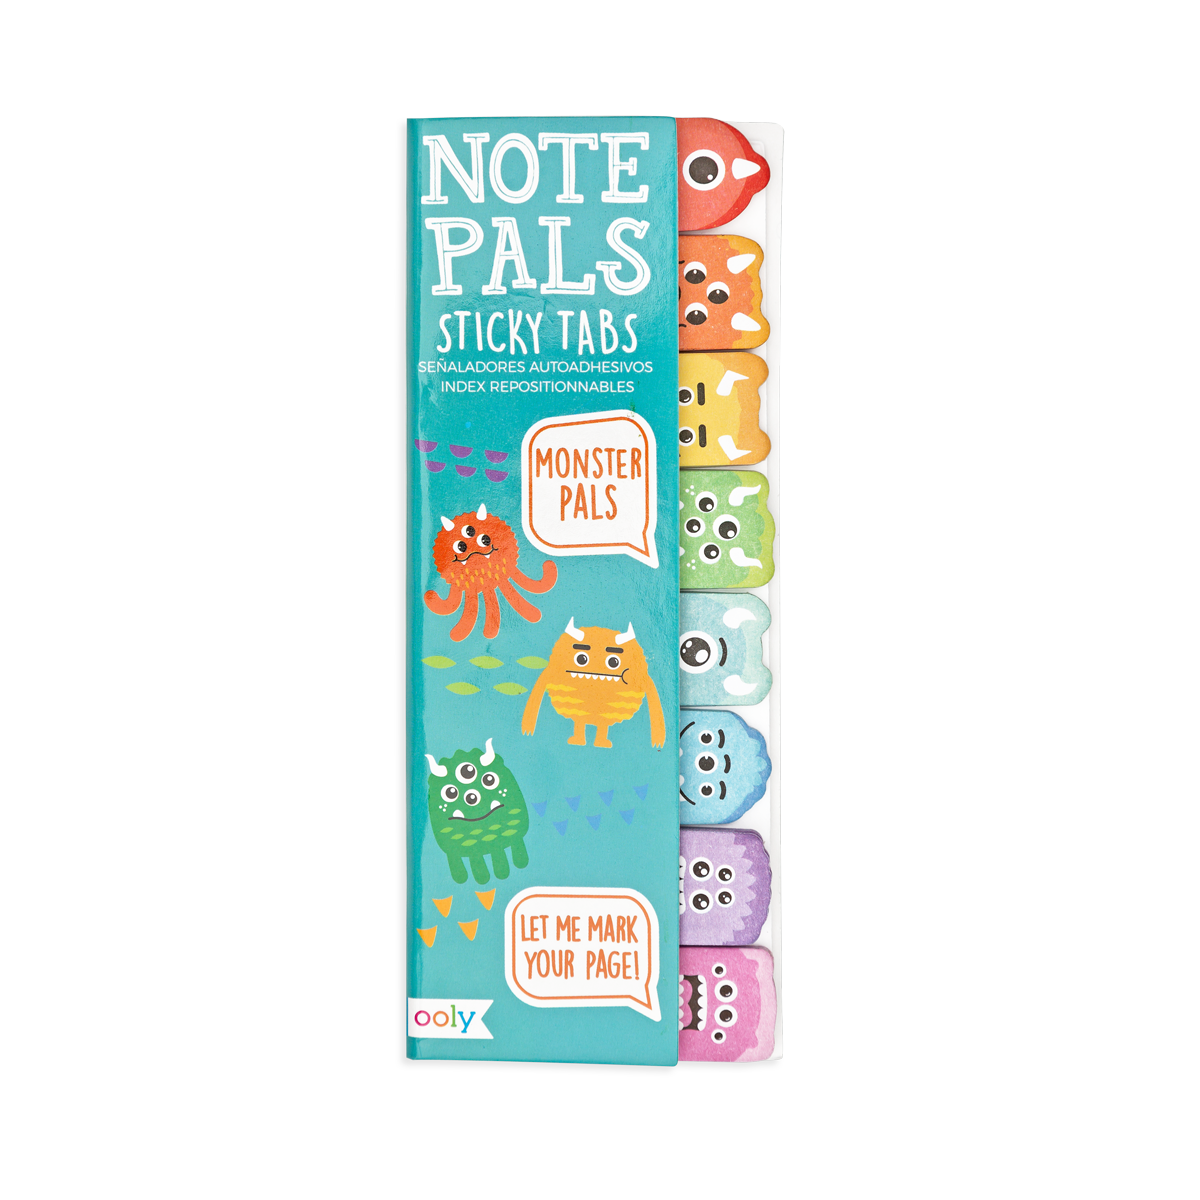 Note Pals Sticky Tabs - Monster Pals